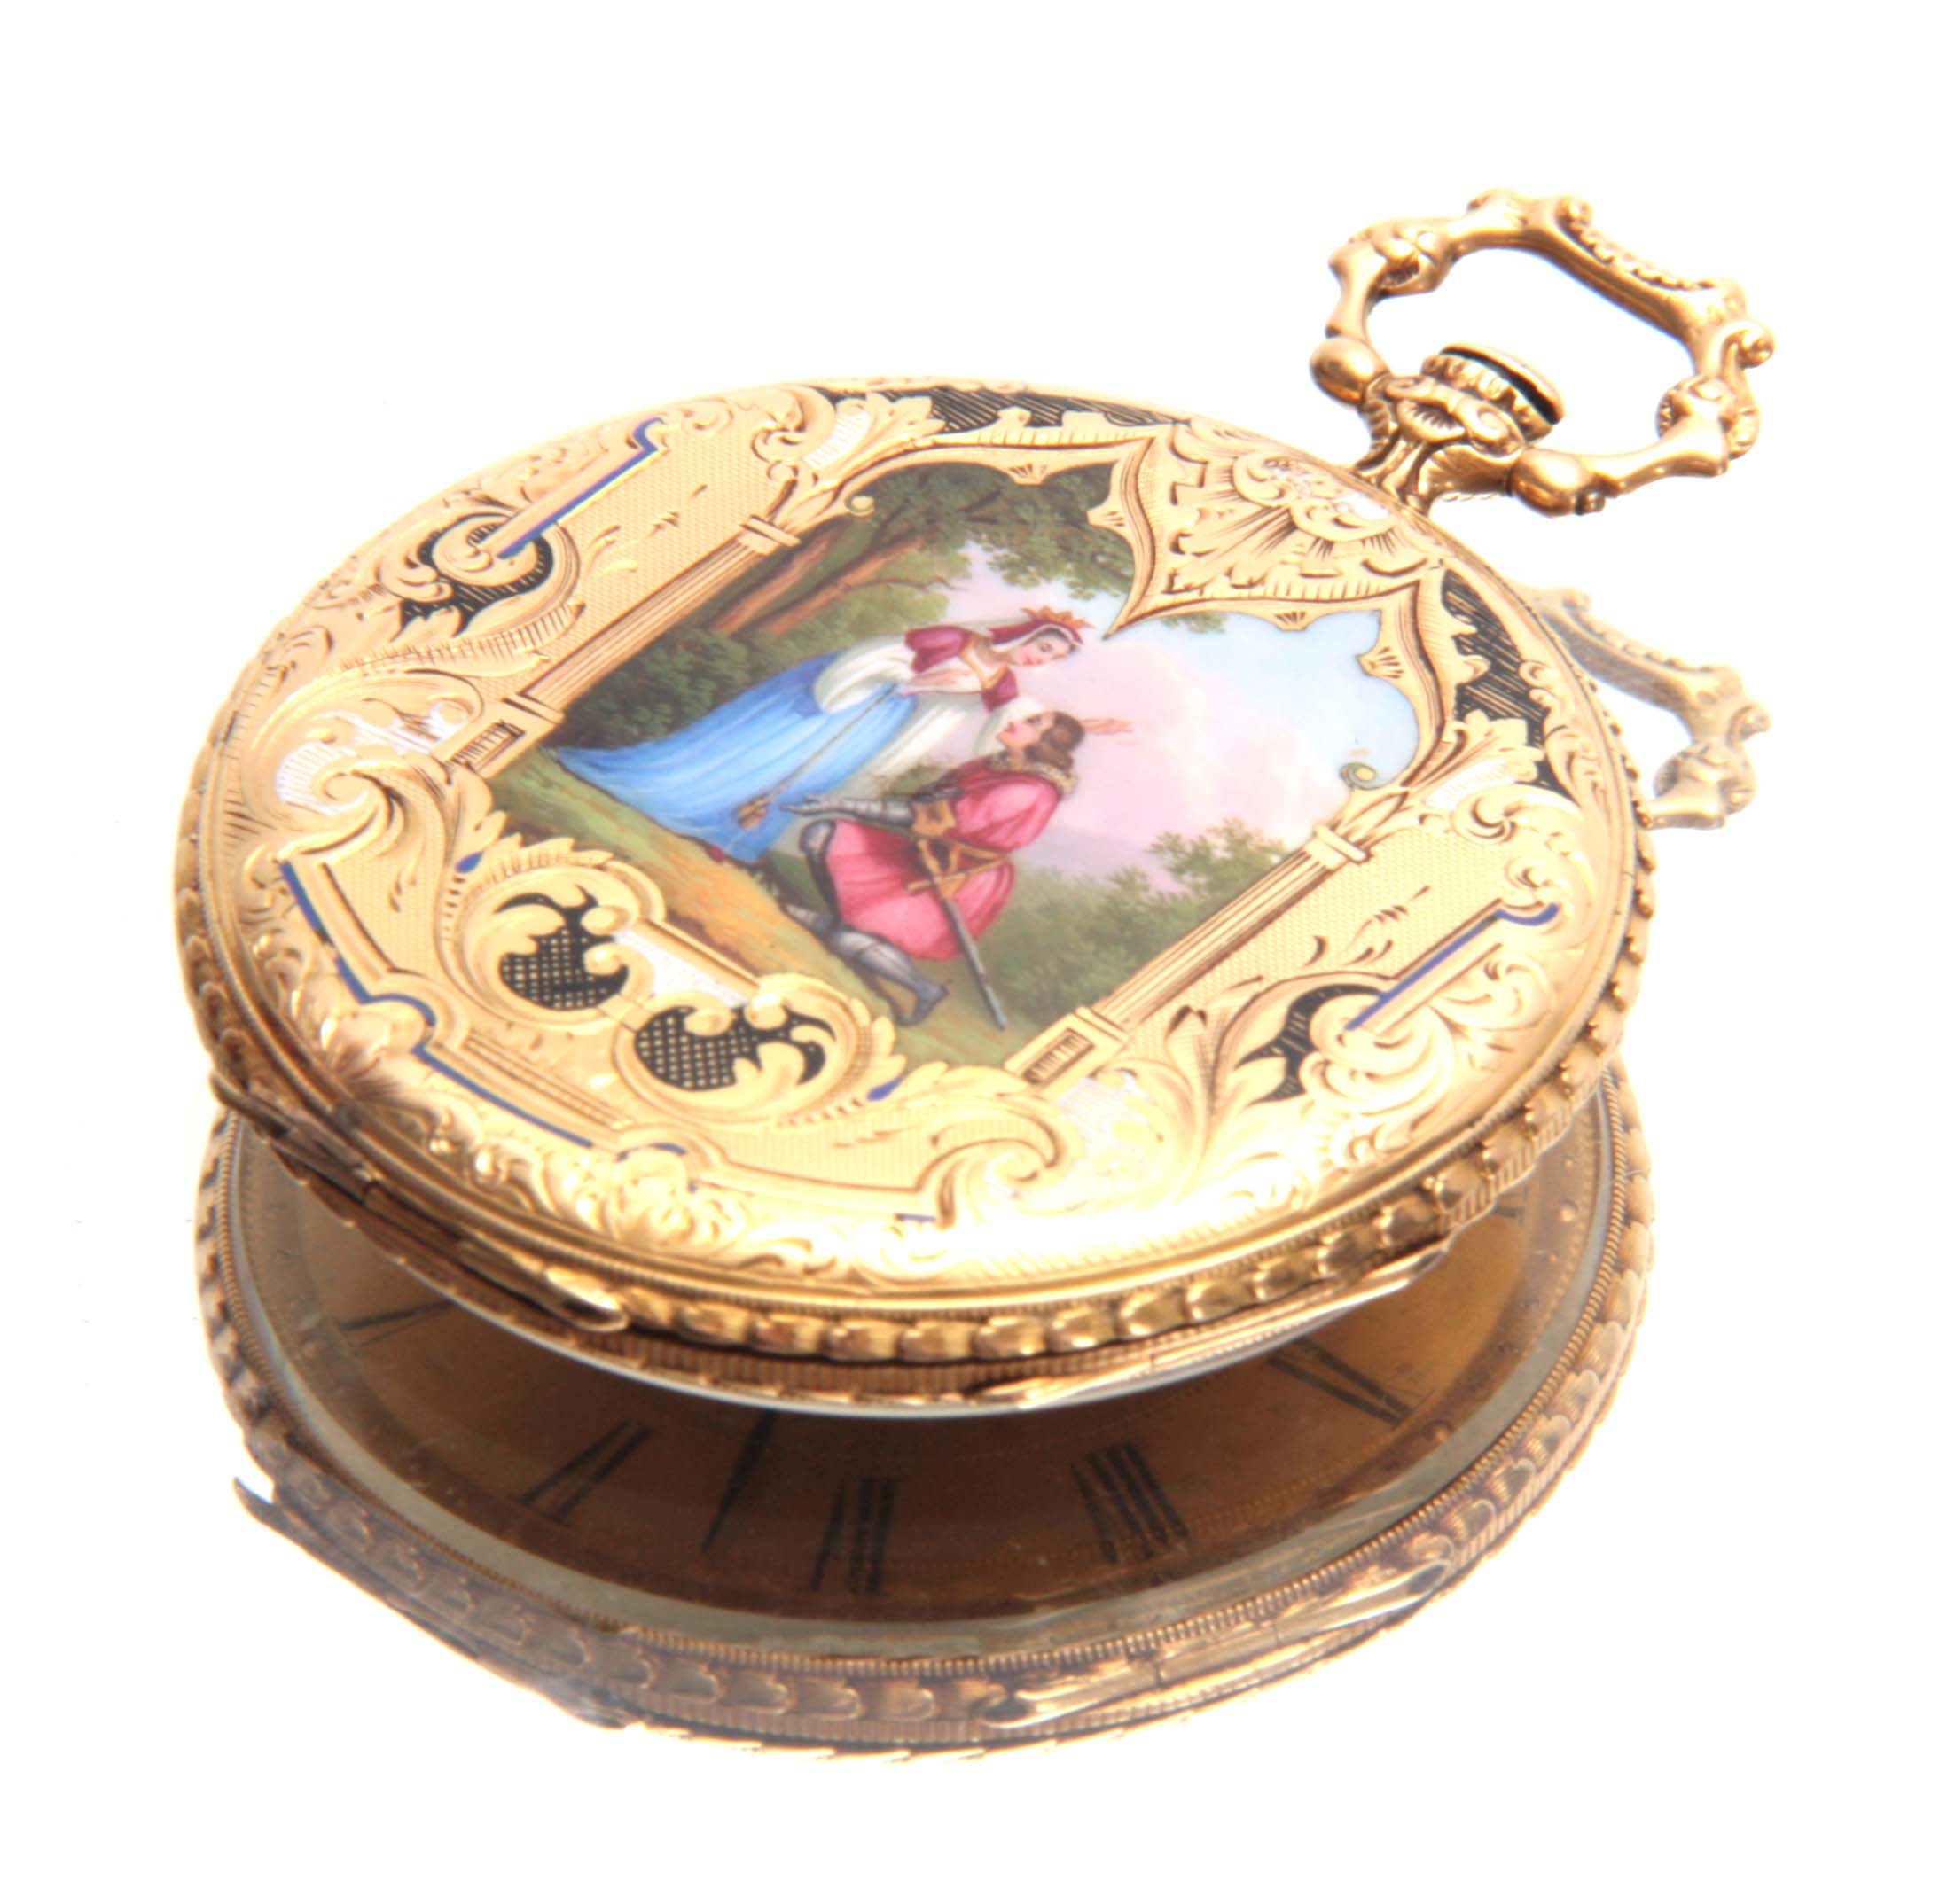 ROBIN, A PARIS. A LATE 19TH CENTURY 18CT GOLD AND ENAMEL POCKET WATCH the outer case back finely